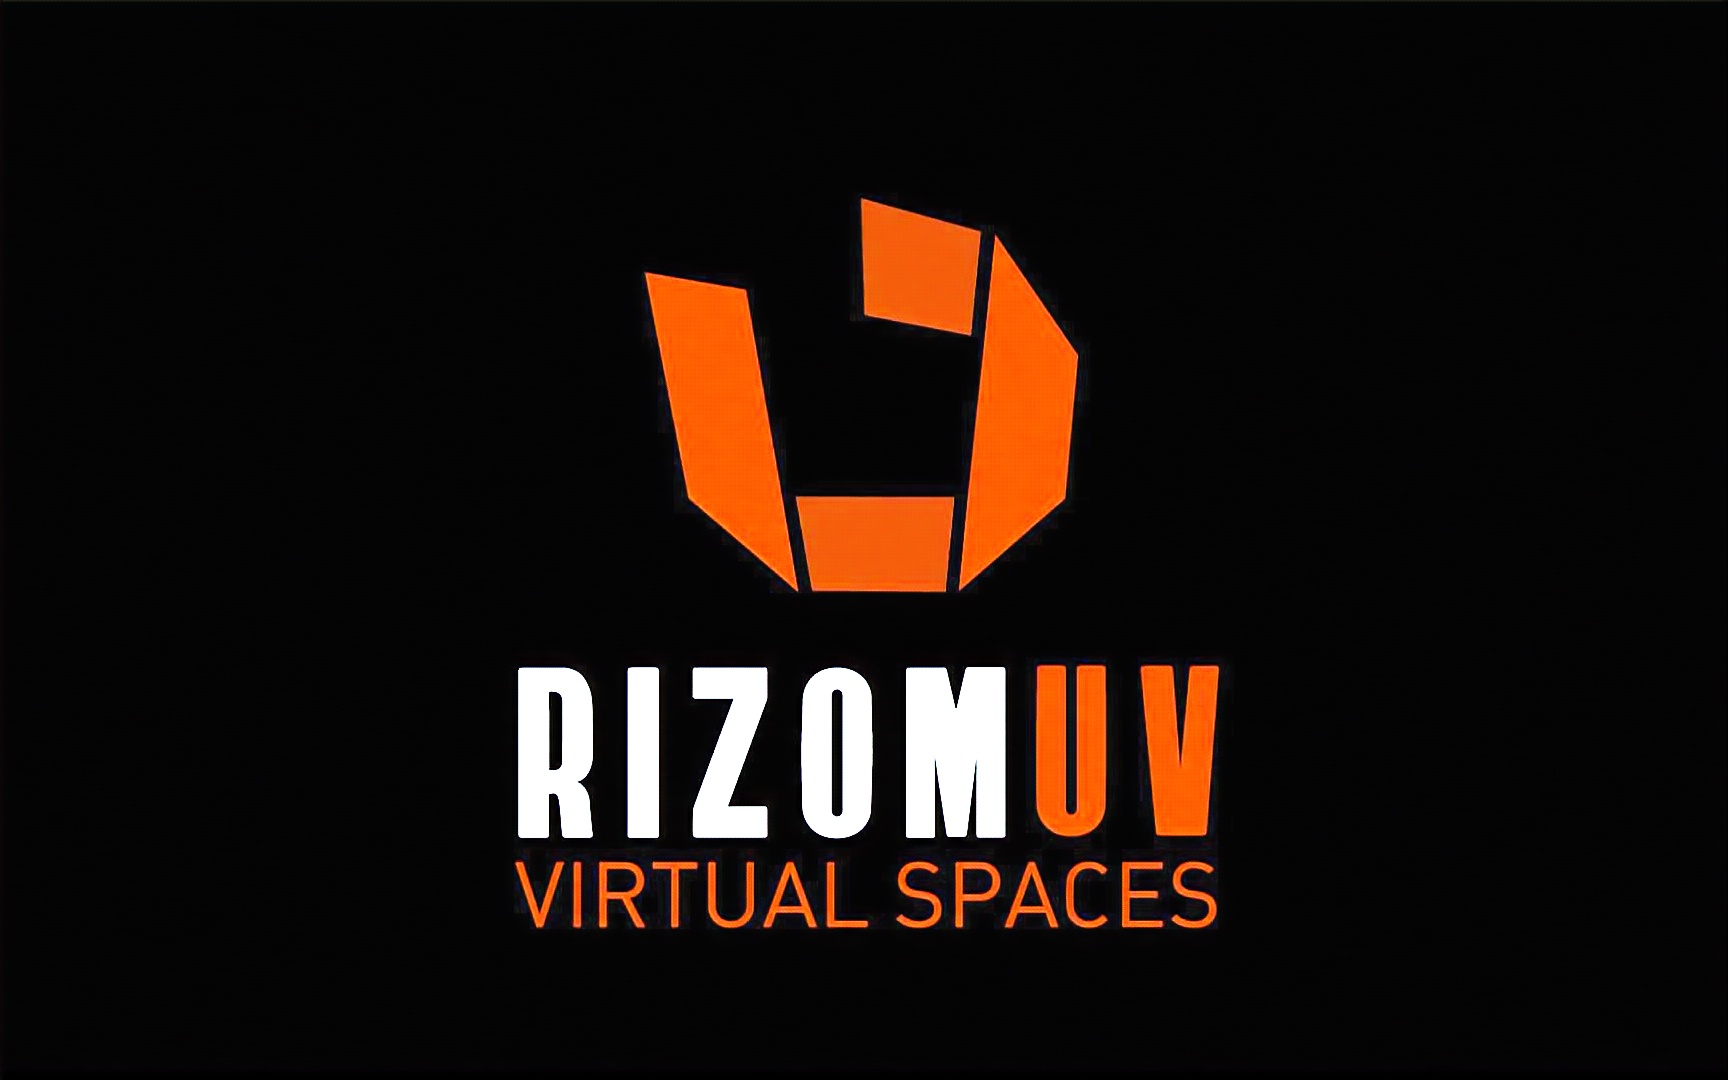 Rizom-Lab RizomUV Real & Virtual Space 2023.0.54 instal the new for android